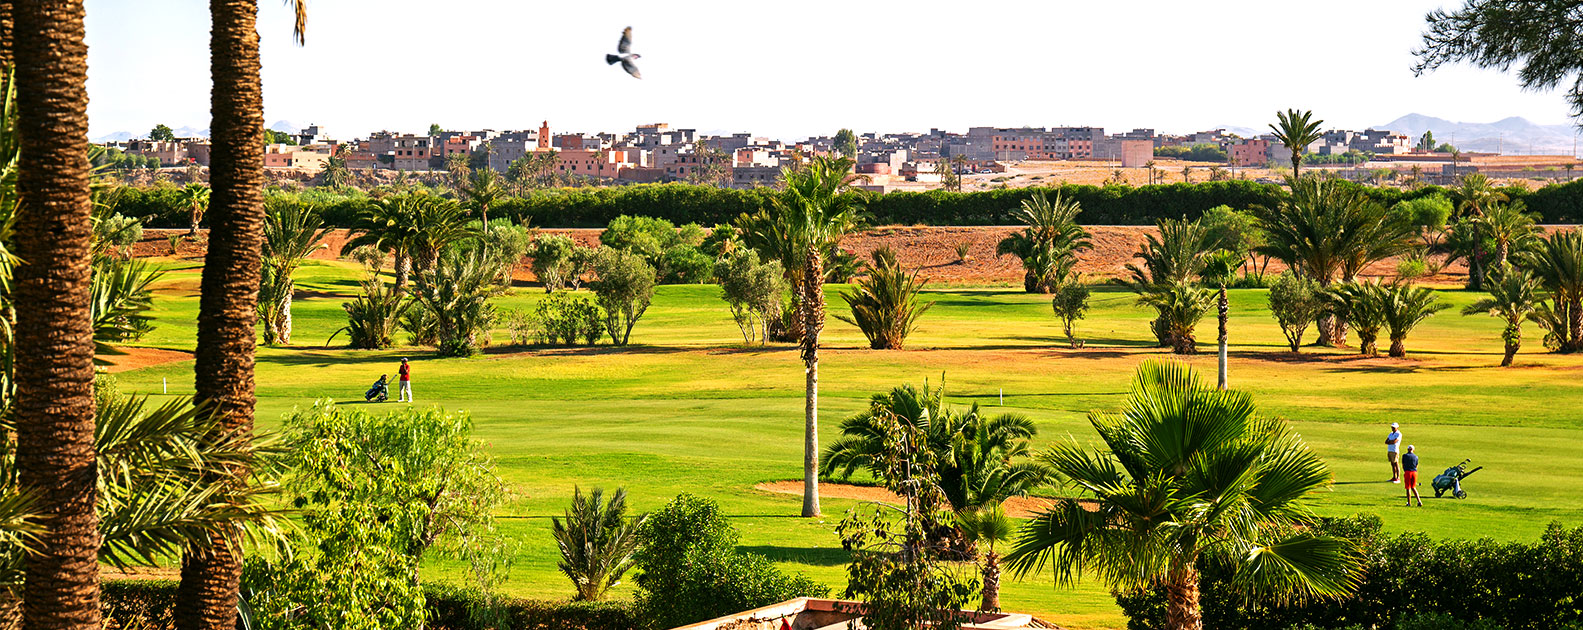 The pleasures of golf in Morocco